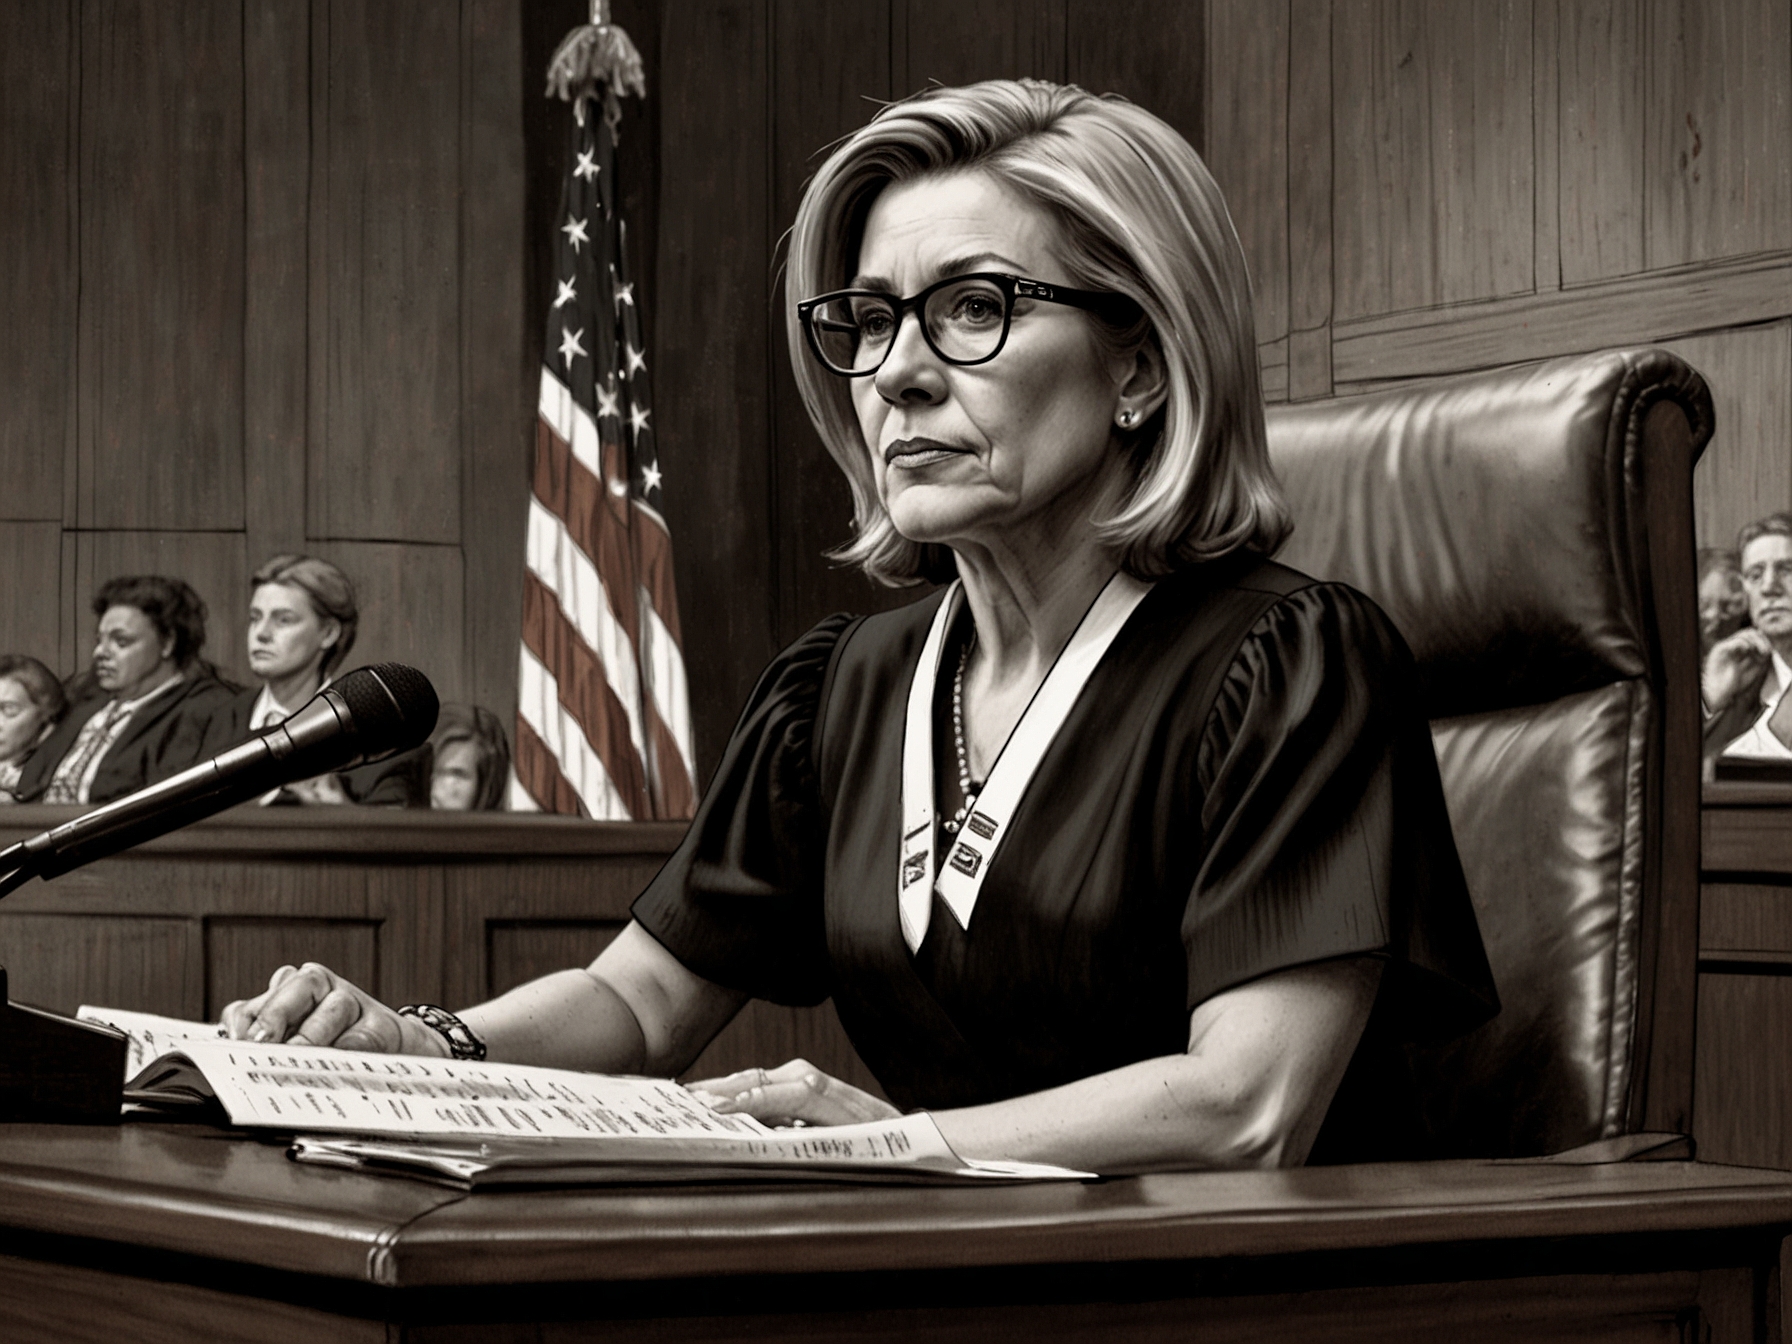 Judge Aileen Cannon sitting in the courtroom, with a concerned expression, highlighting the scrutiny and allegations of favoritism in handling the Trump classified documents case.